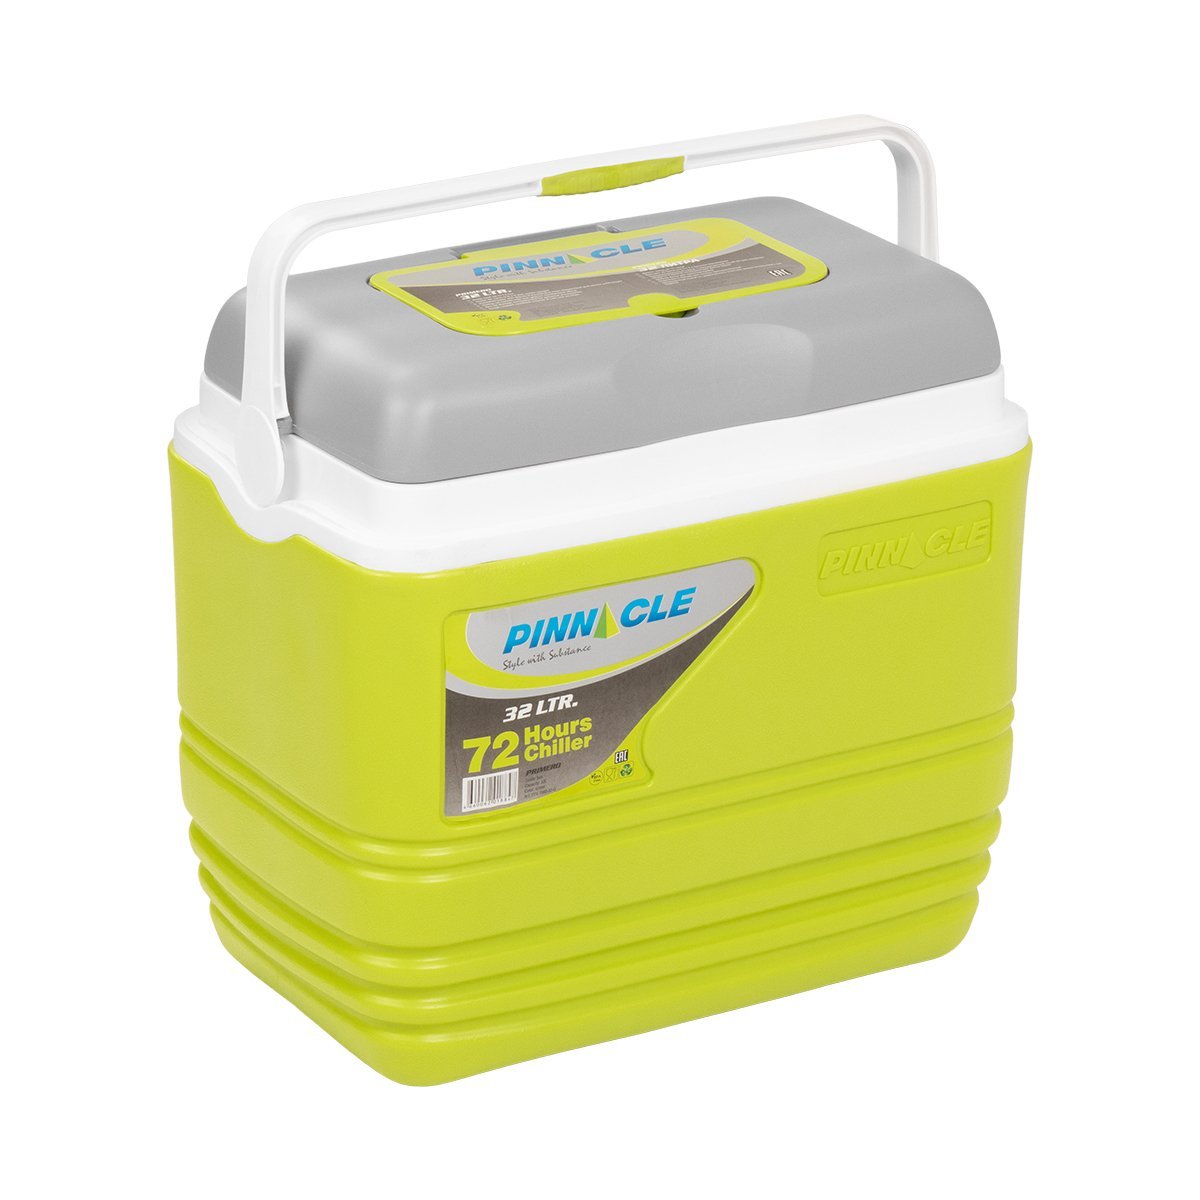 Primero Portable Camping Ice Chest with Lid Cup Holders, 33 qt, green color